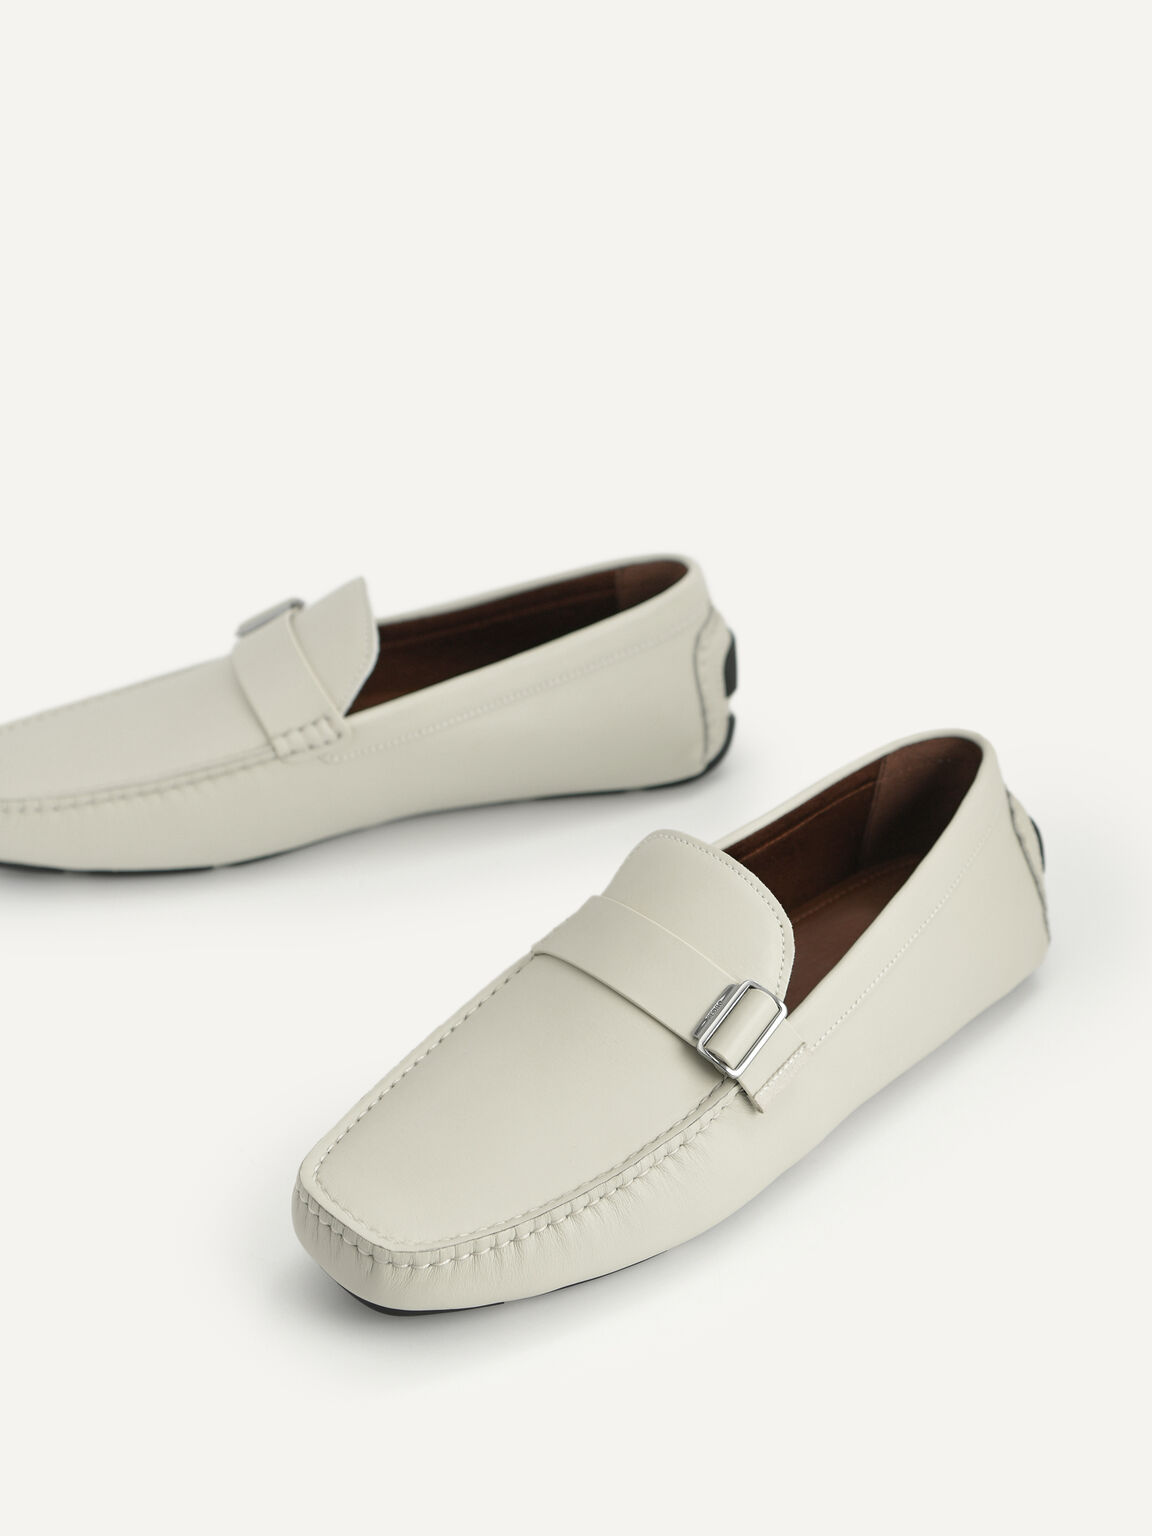 Leather Moccasins with Buckle Detail, Light Grey